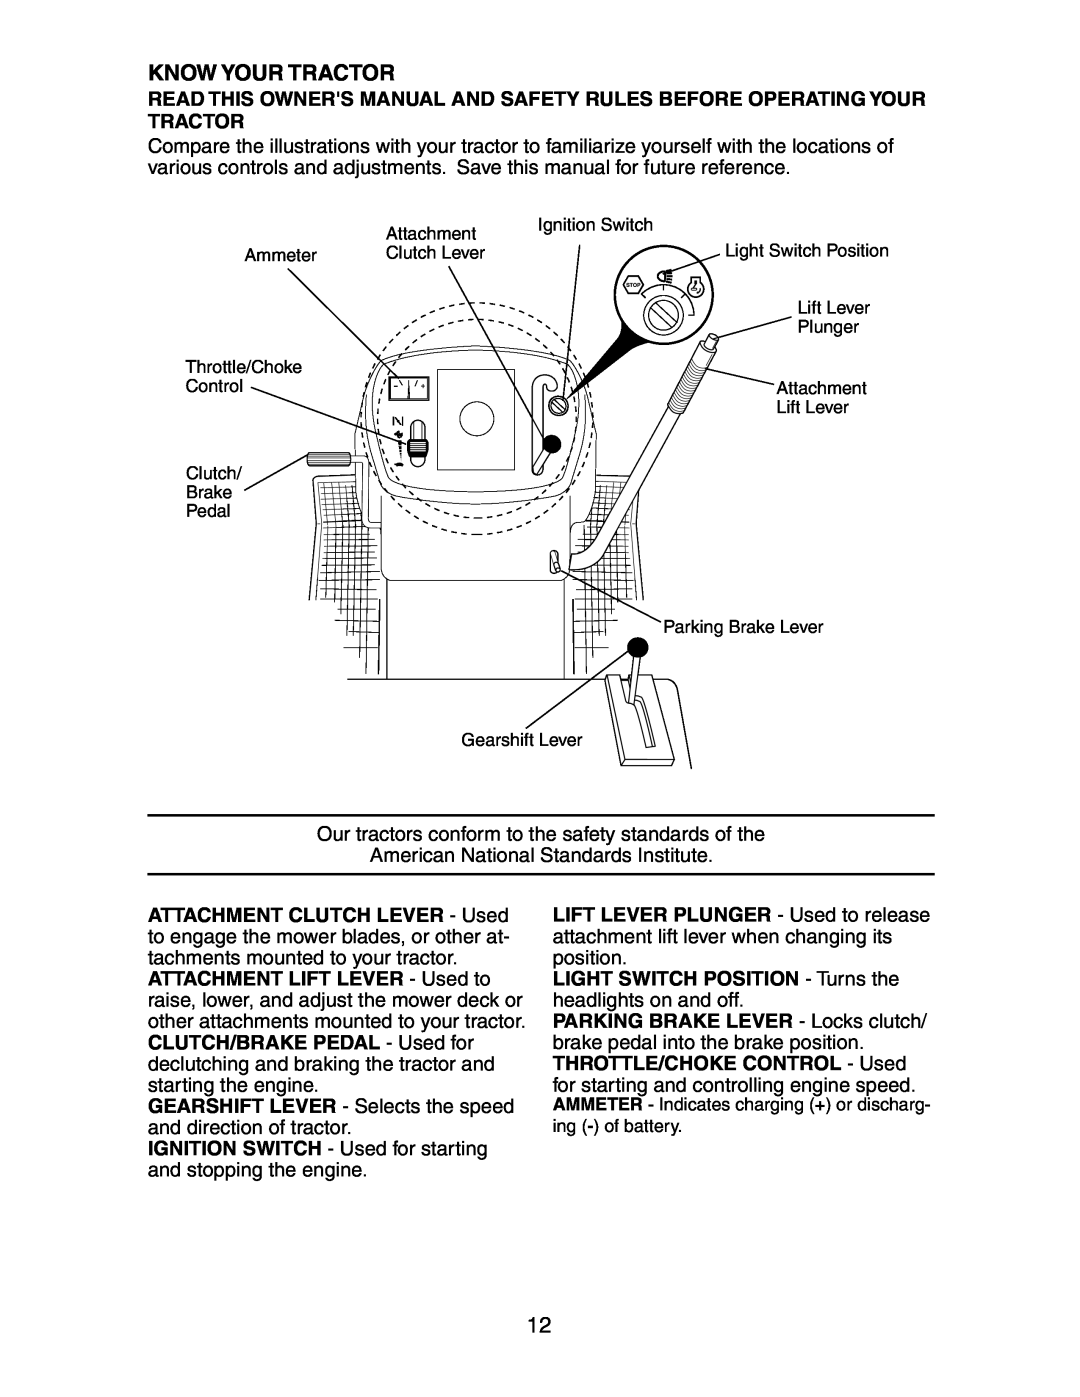 Poulan CO1842STA manual Know Your Tractor, LIGHT SWITCH POSITION - Turns the headlights on and off 